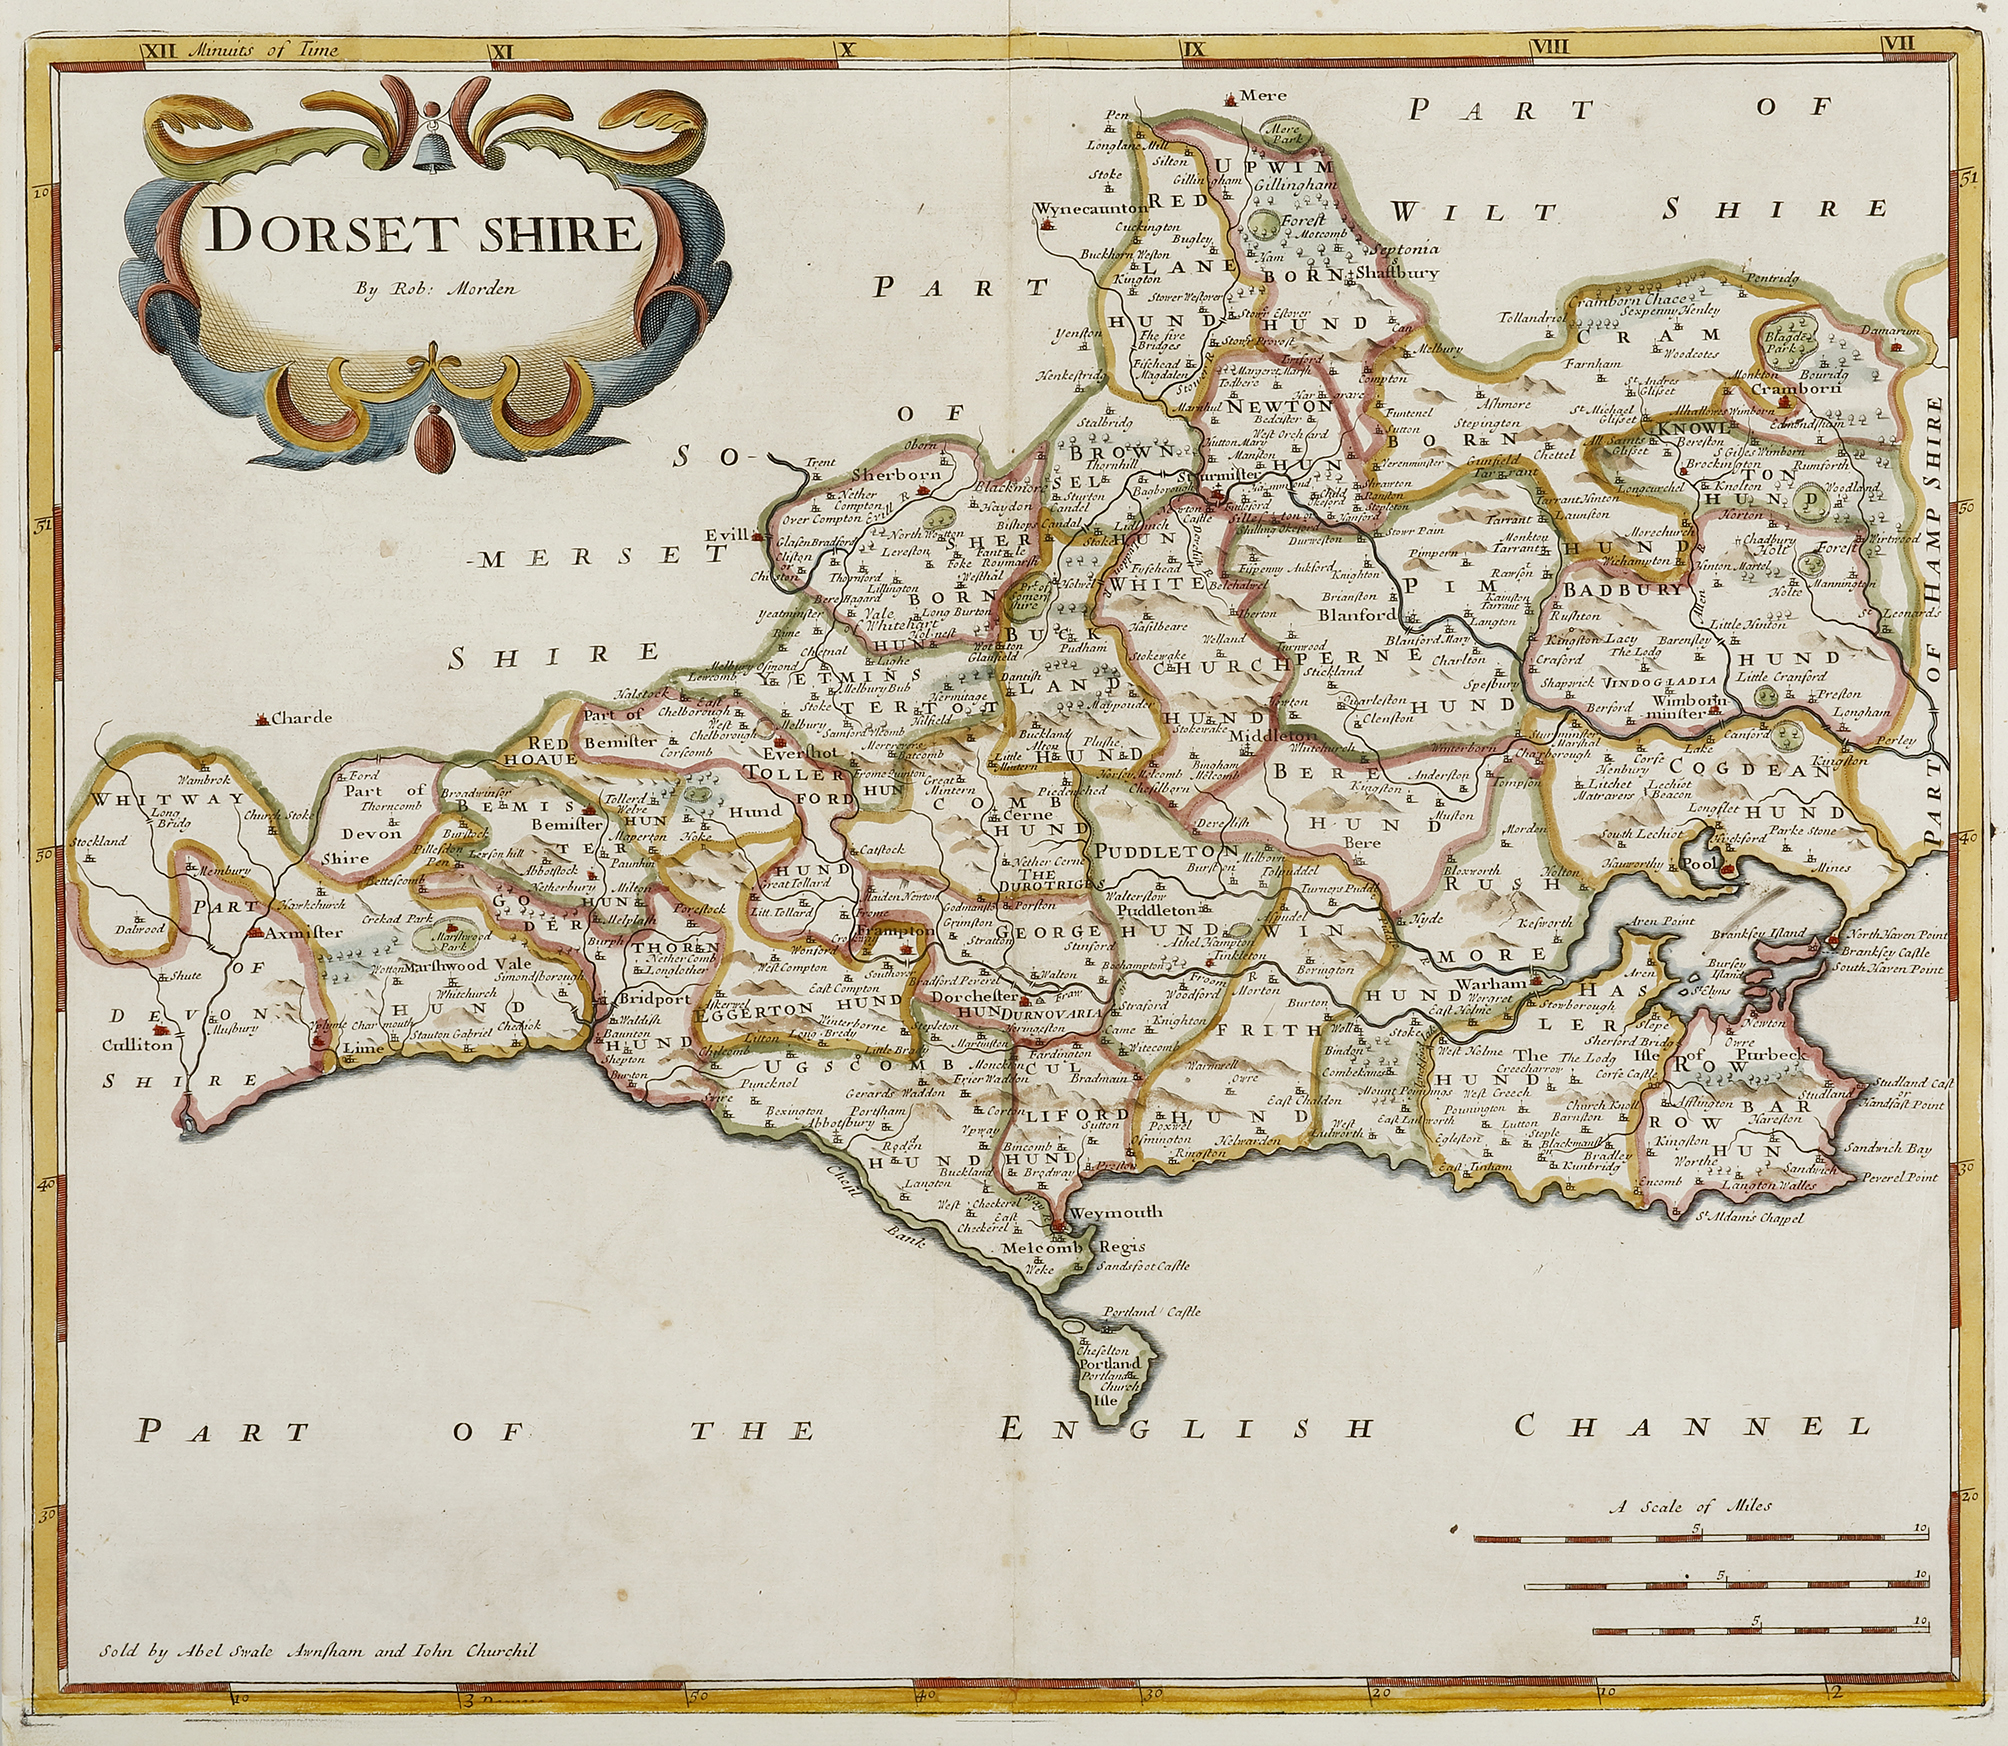 ENGLAND-Dorset Shire - Antique Map from 1695